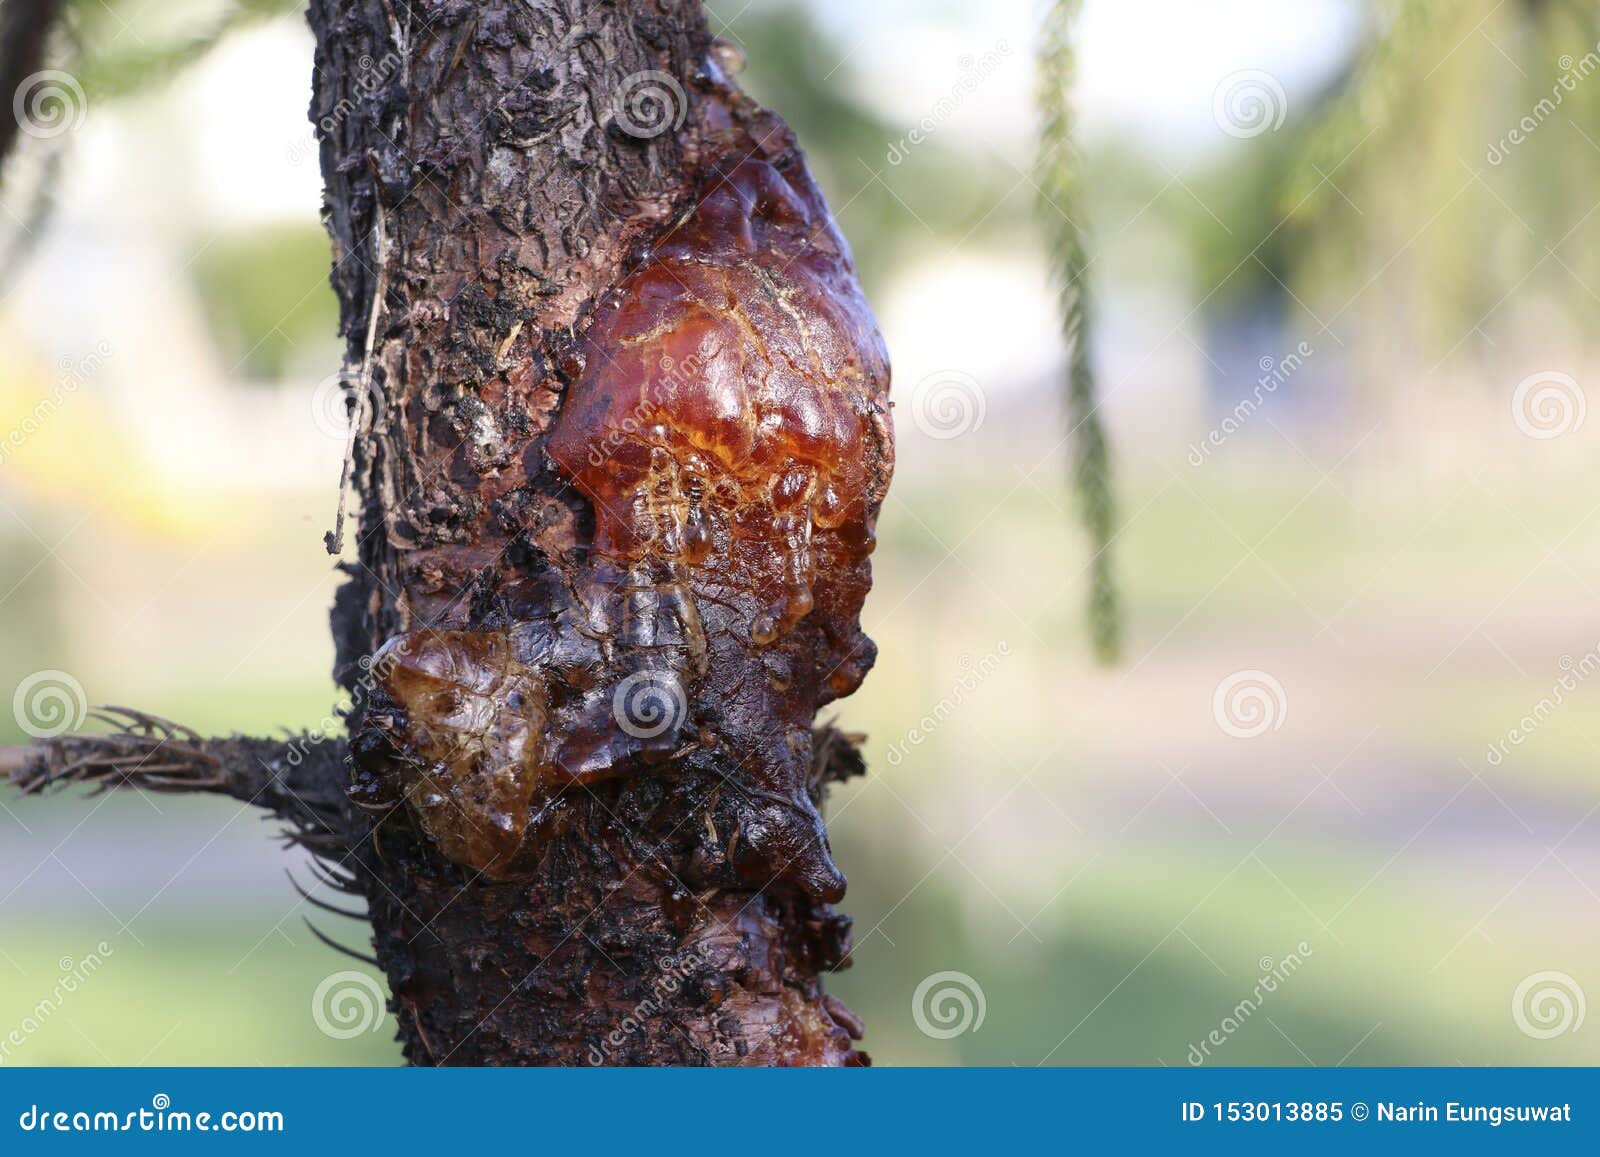 the resin of pine trees flows from the wound on the side of the trunk.